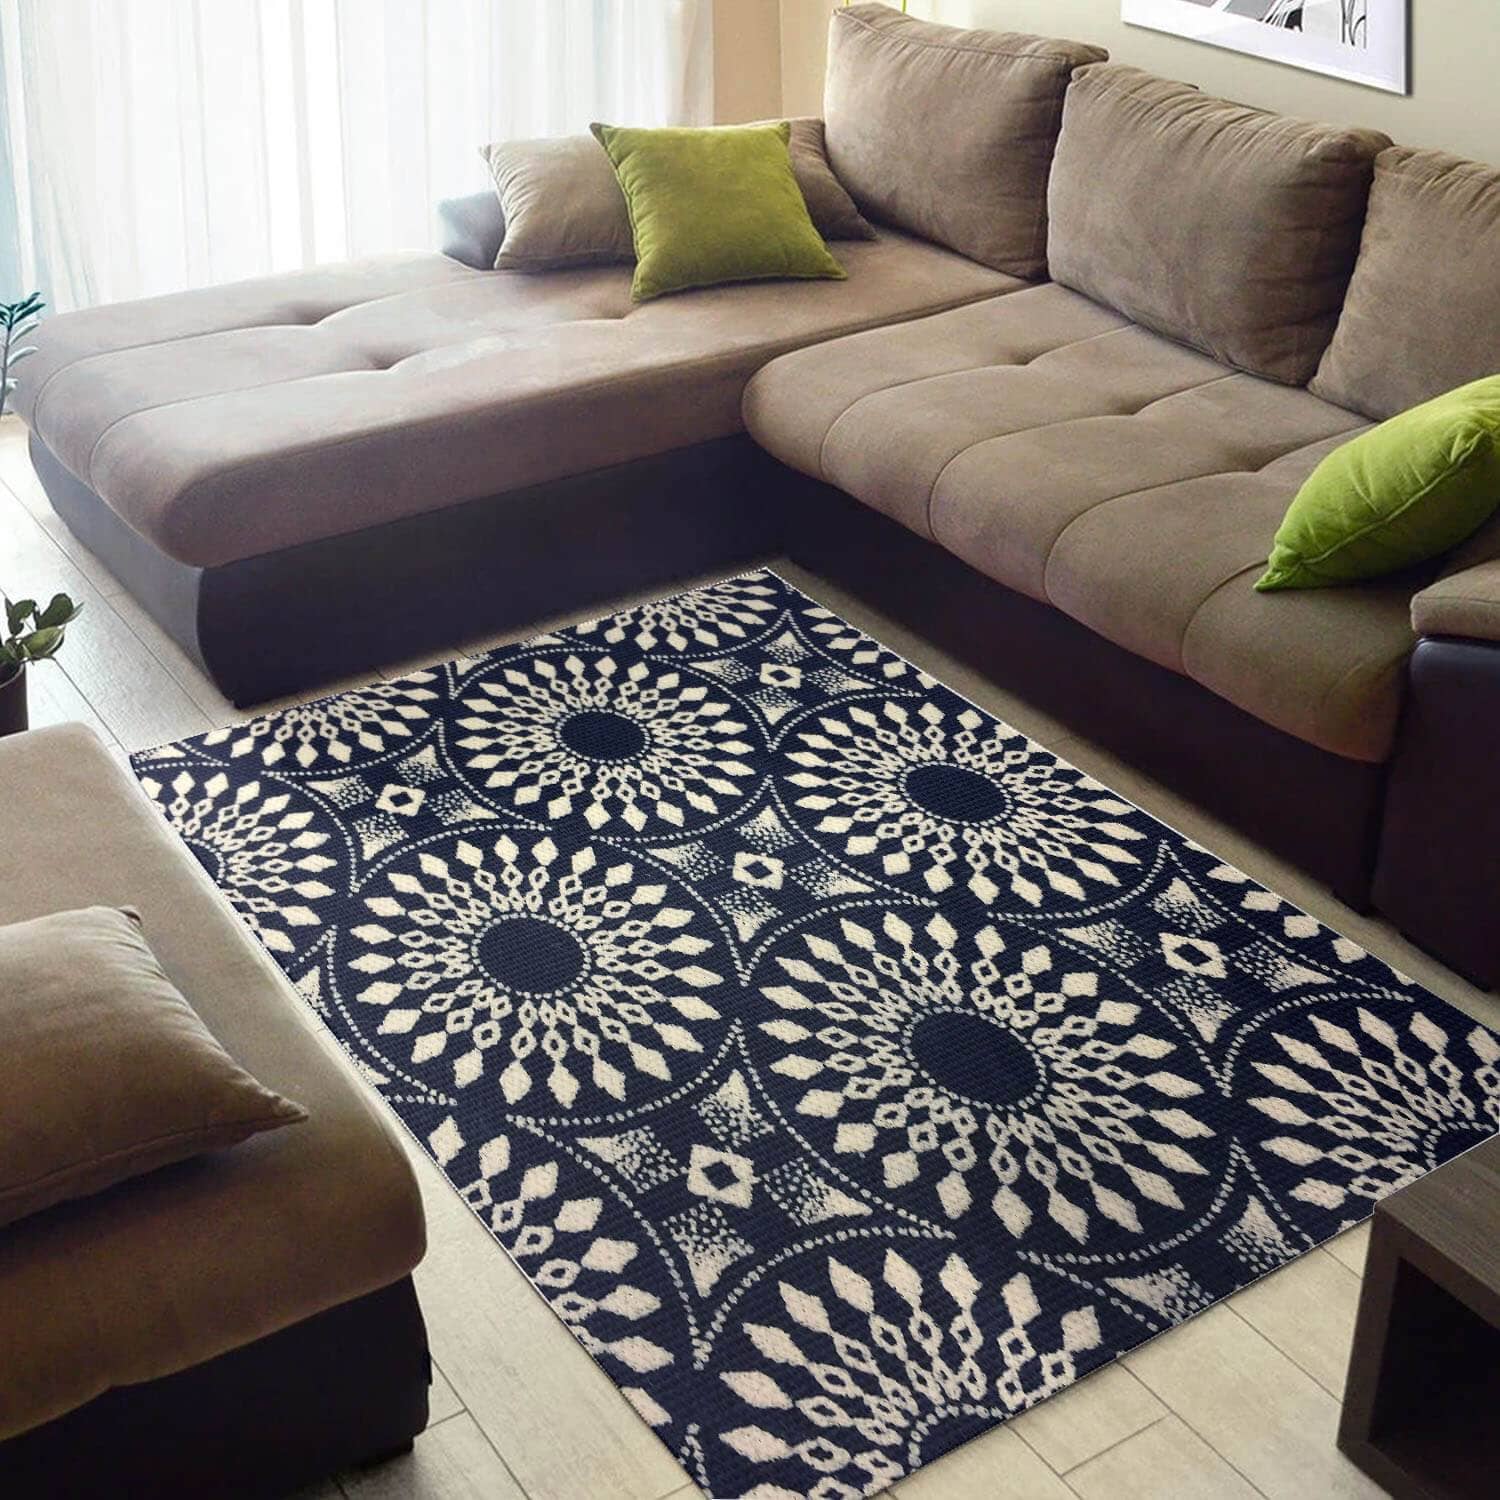 Trendy African Holiday American Art Ethnic Seamless Pattern Themed Home Rug